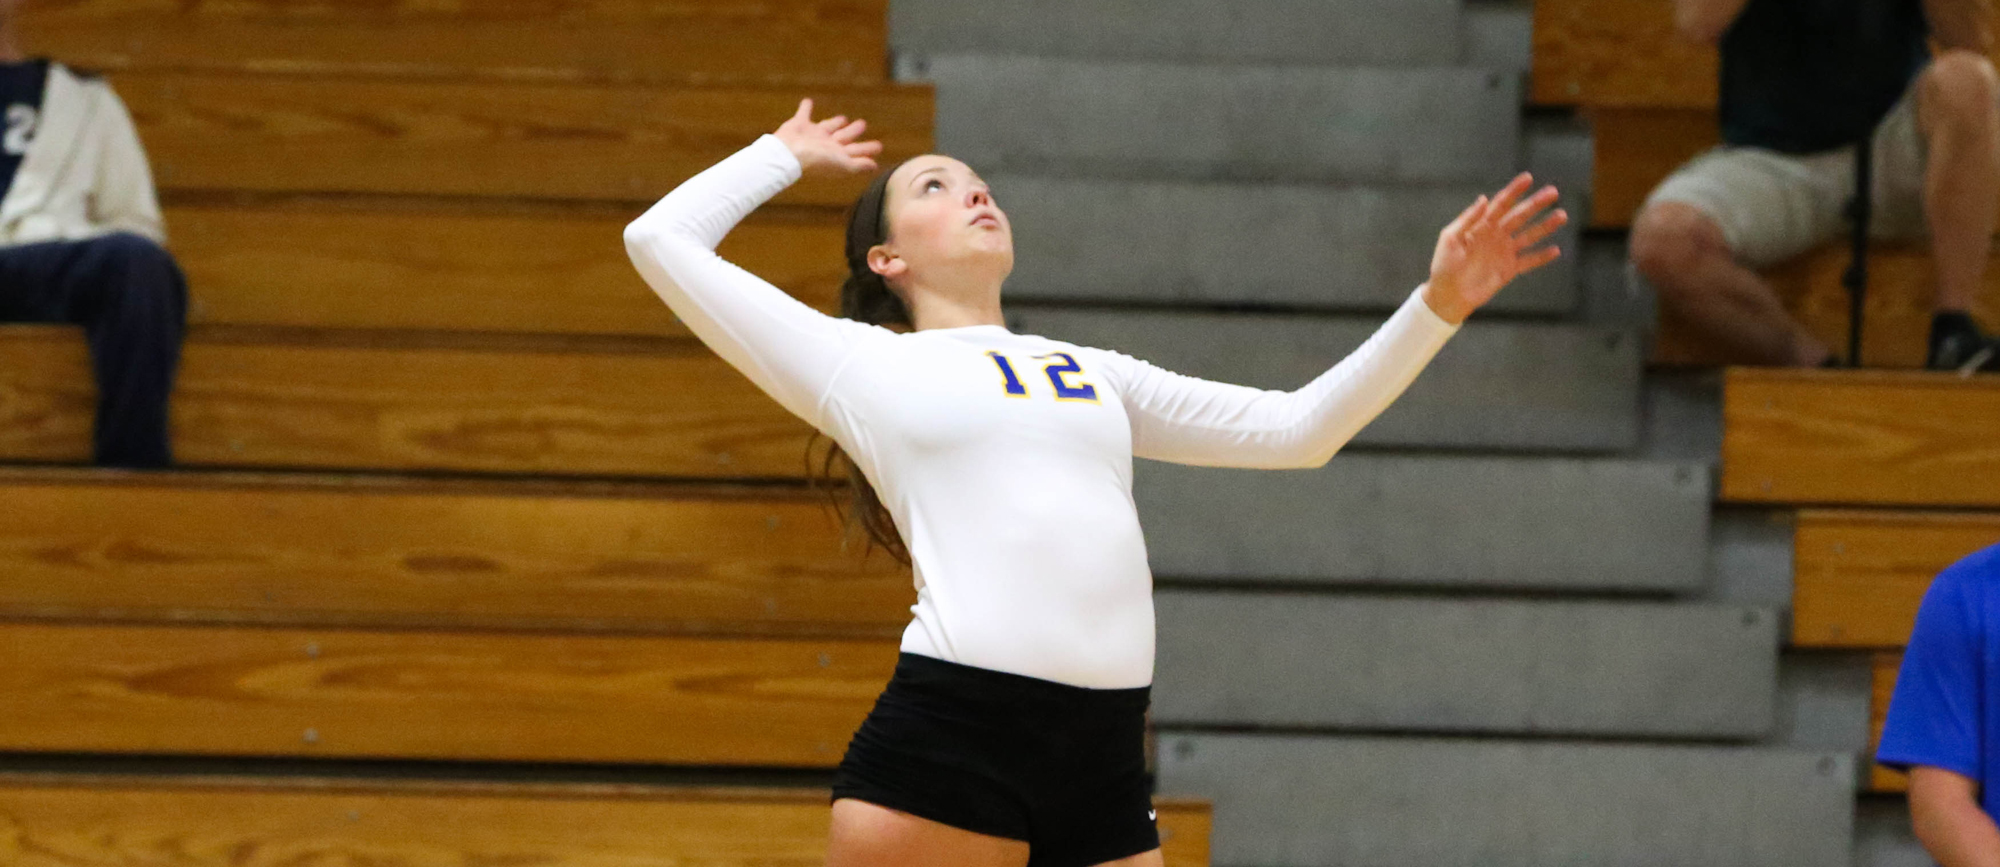 Junior Ashley Matthews totaled 11 kills and 11 digs as Western New England fell to Rivier and Vassar on Sunday at the Kean University Invitational.